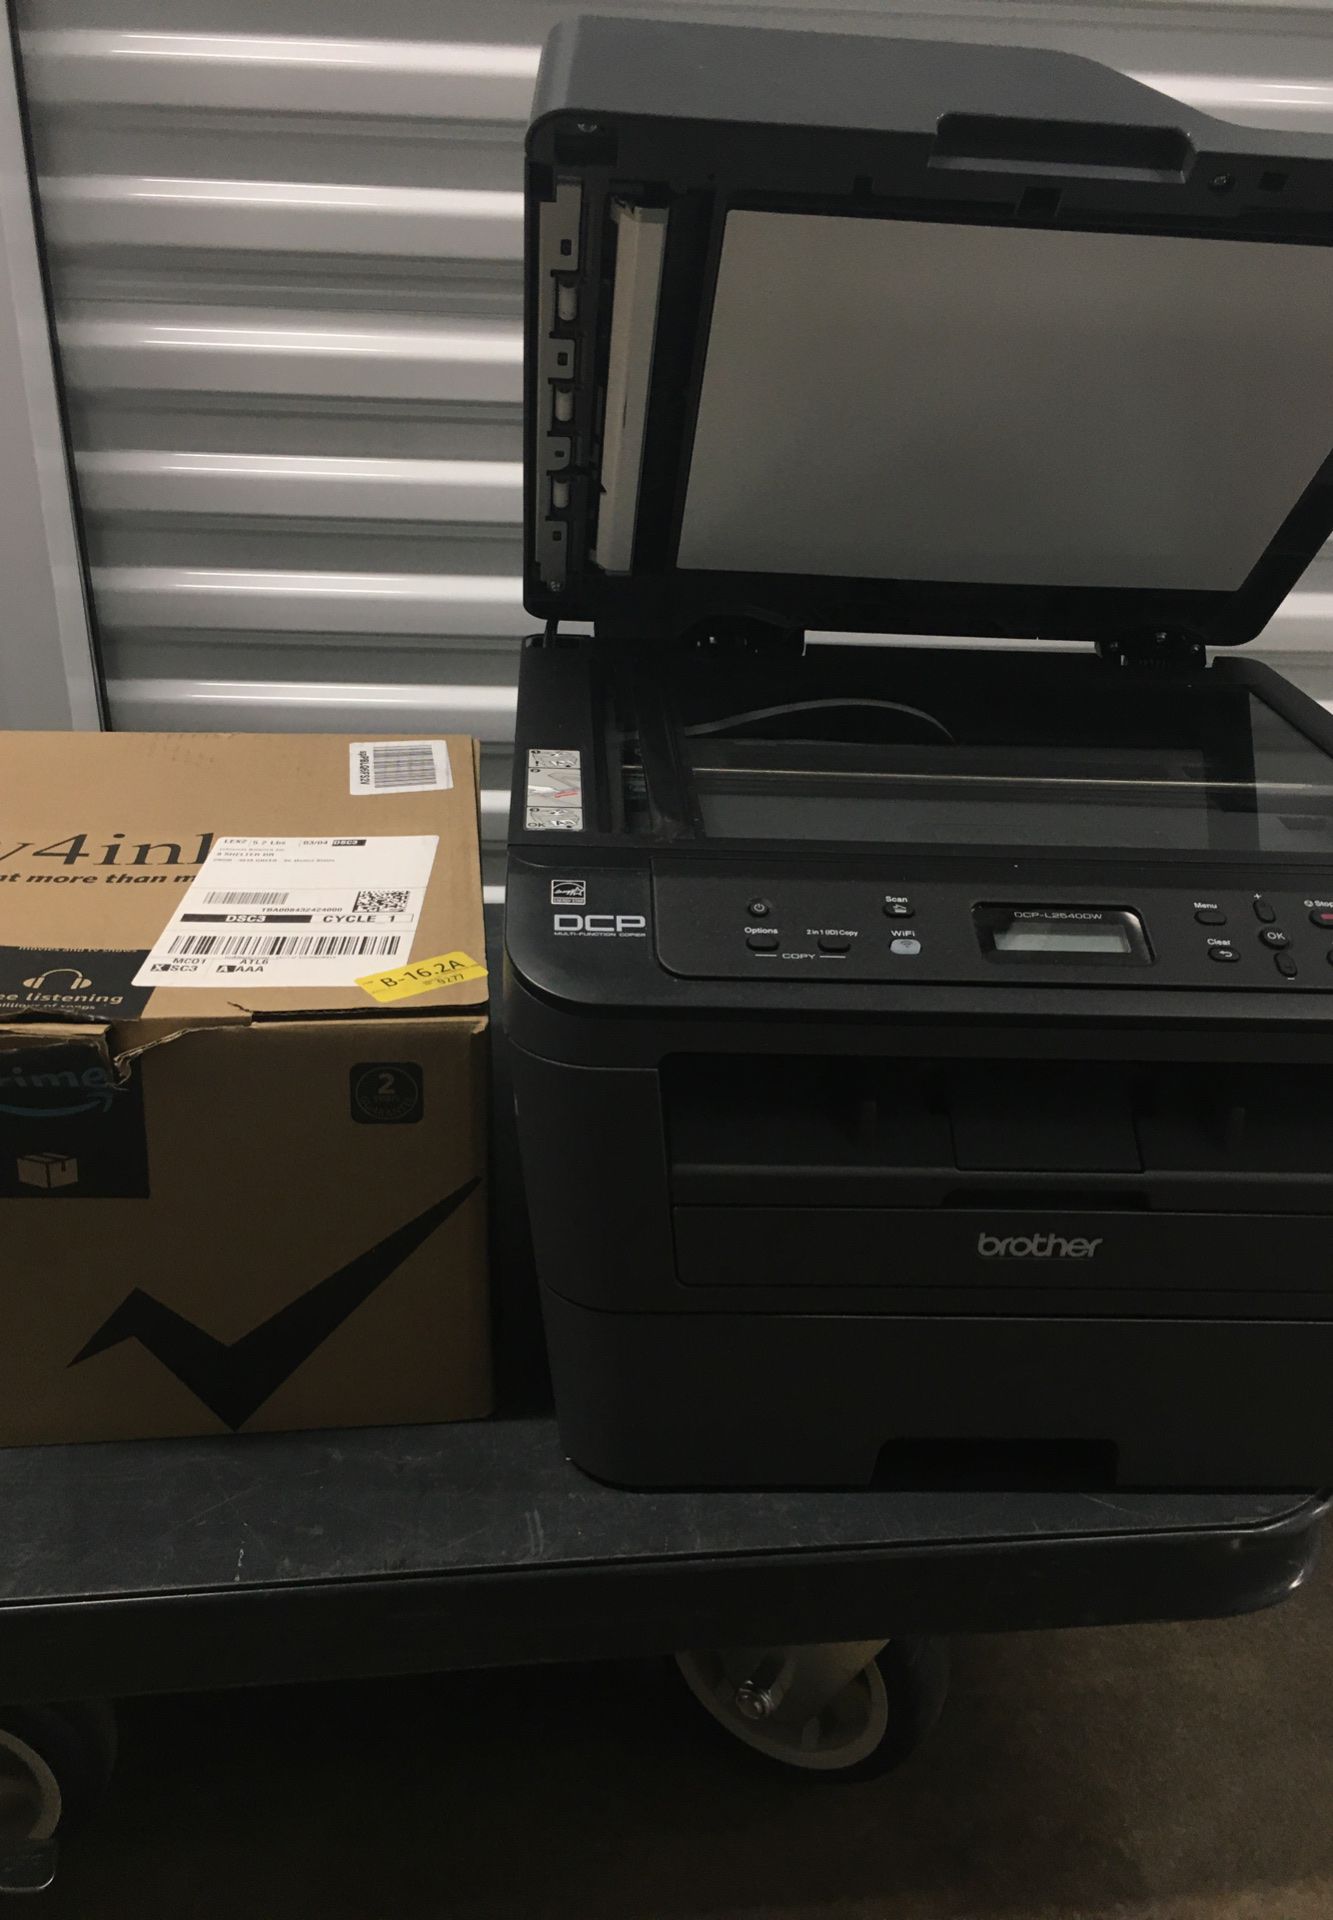 Brother DCP-L2540DW Printer with 3 Ink Cartridges